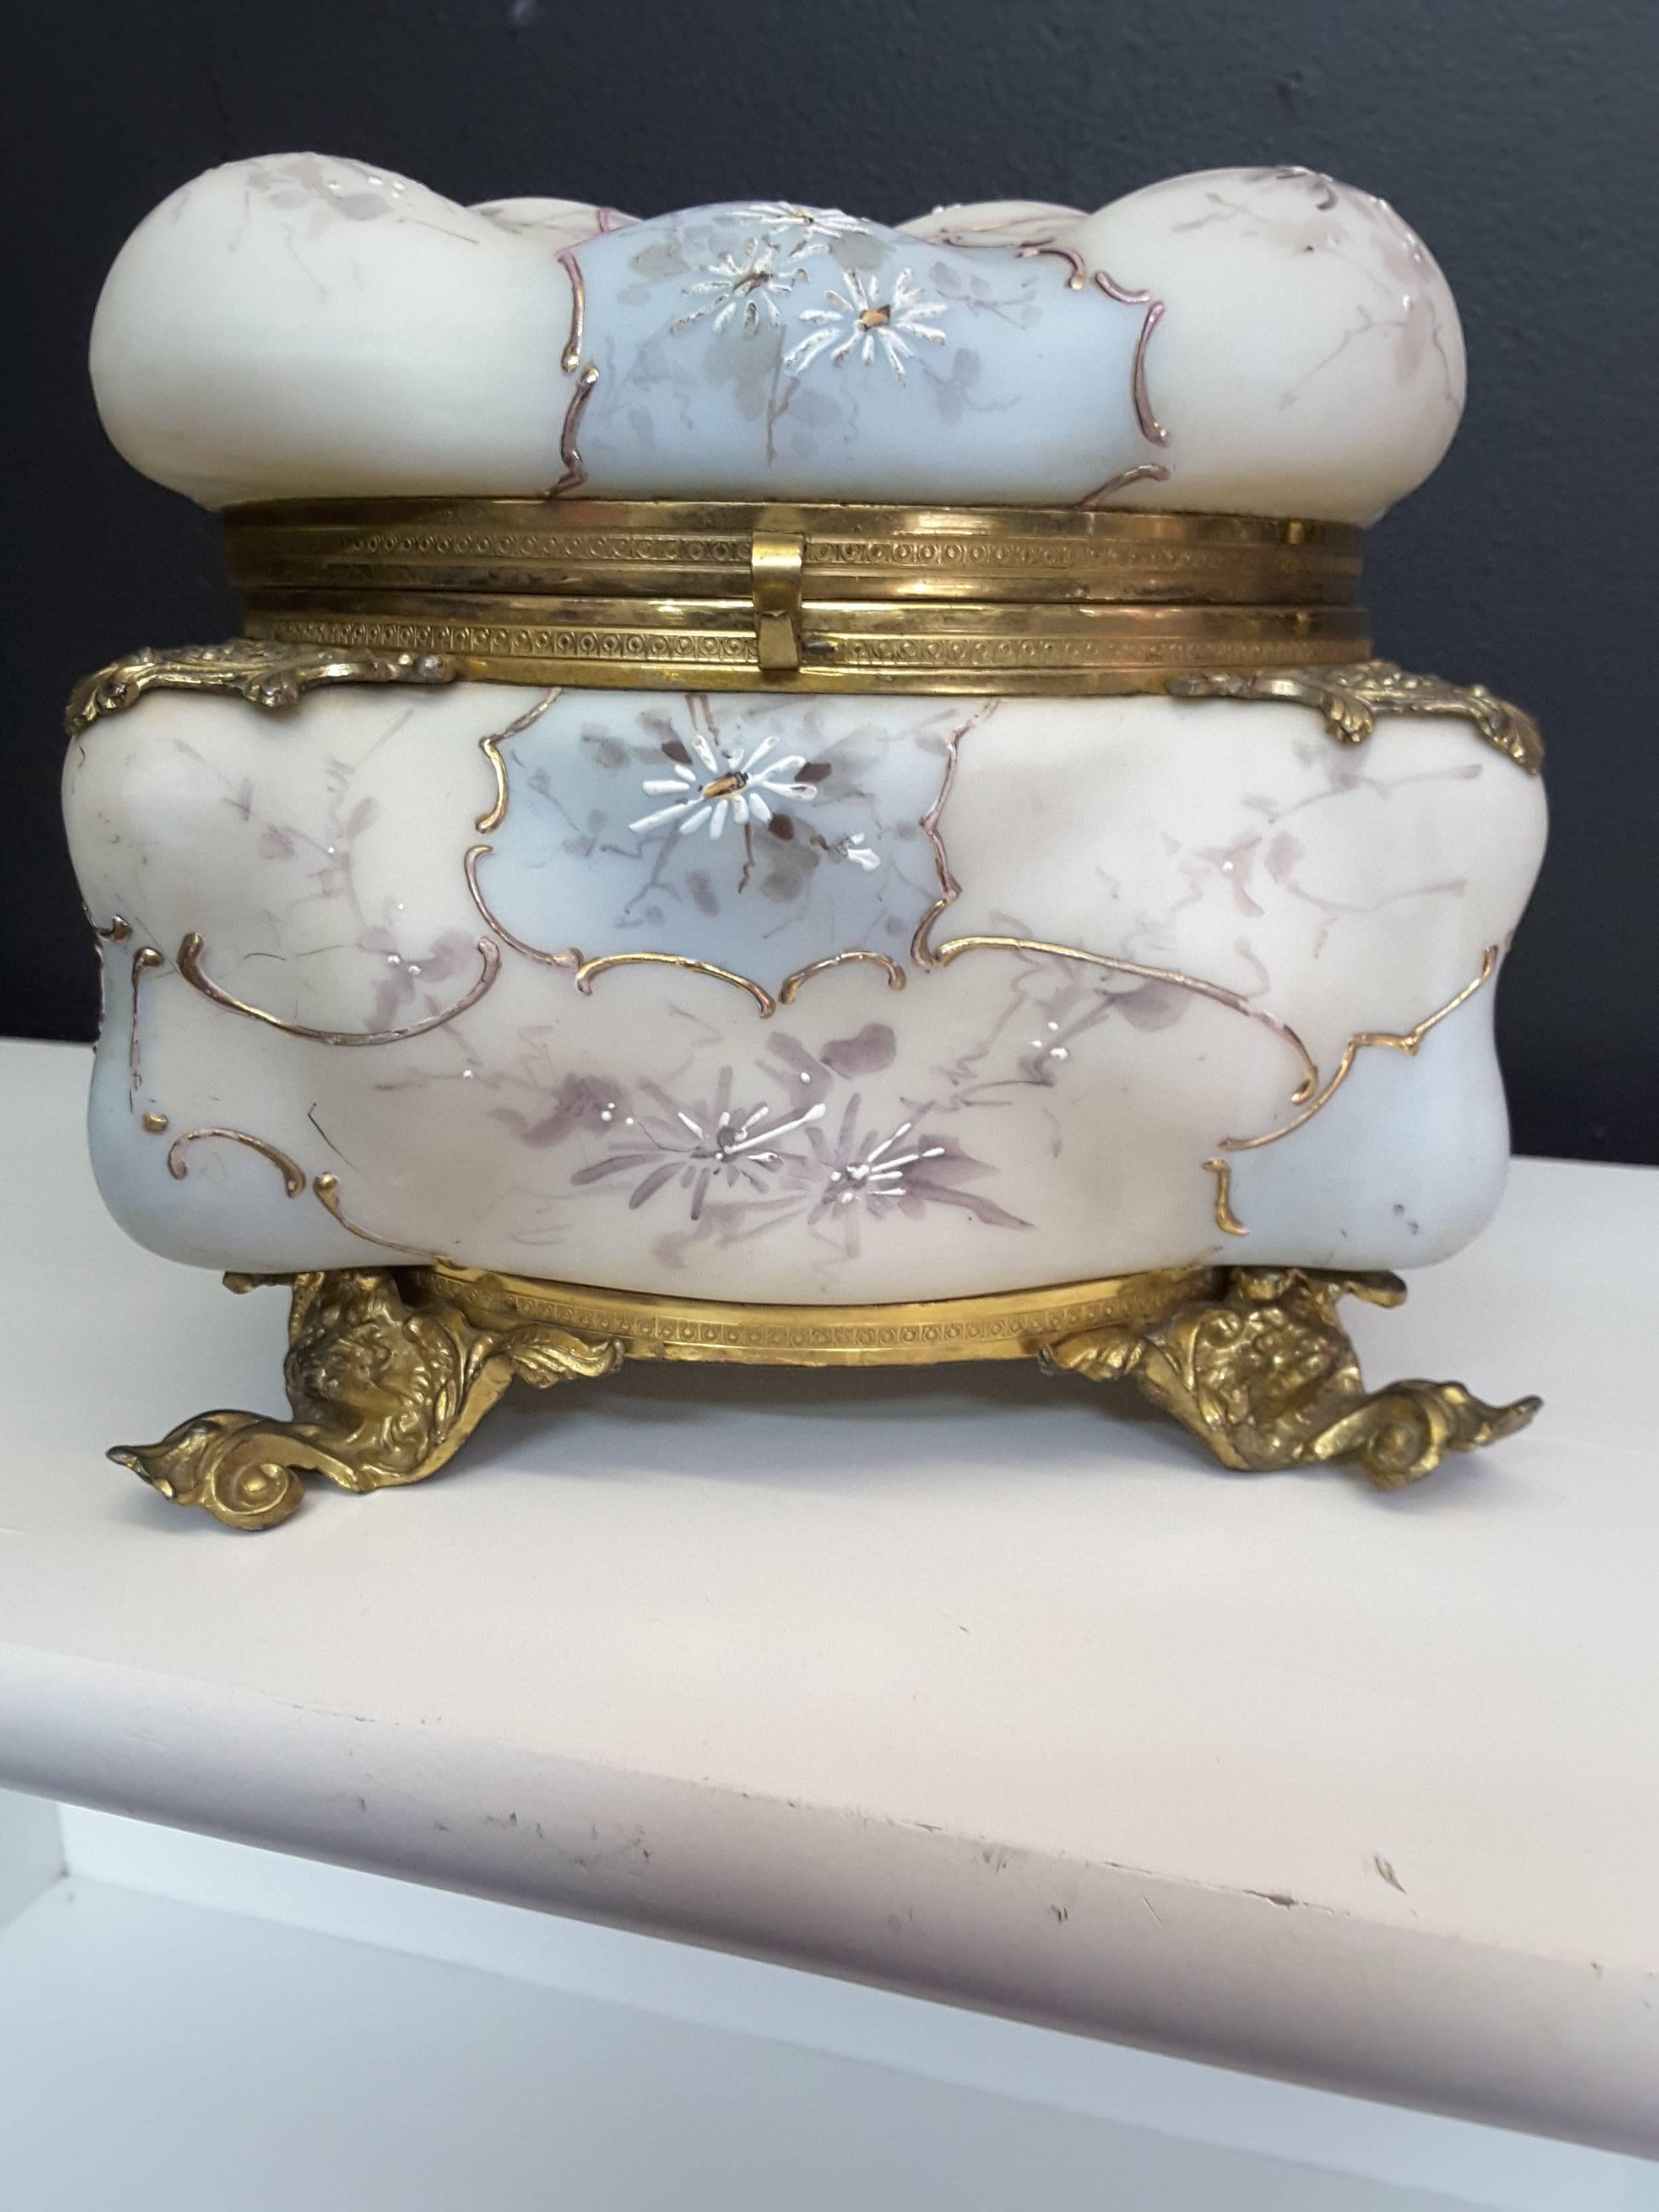 Largest size made wave crest floral jewelry casket/trinket box, in a white bulbous opalescent glass with raised enamel painted floral decoration, painted in bordered cartouches. White painted flowers, grey and silver vines, the cartouches are done